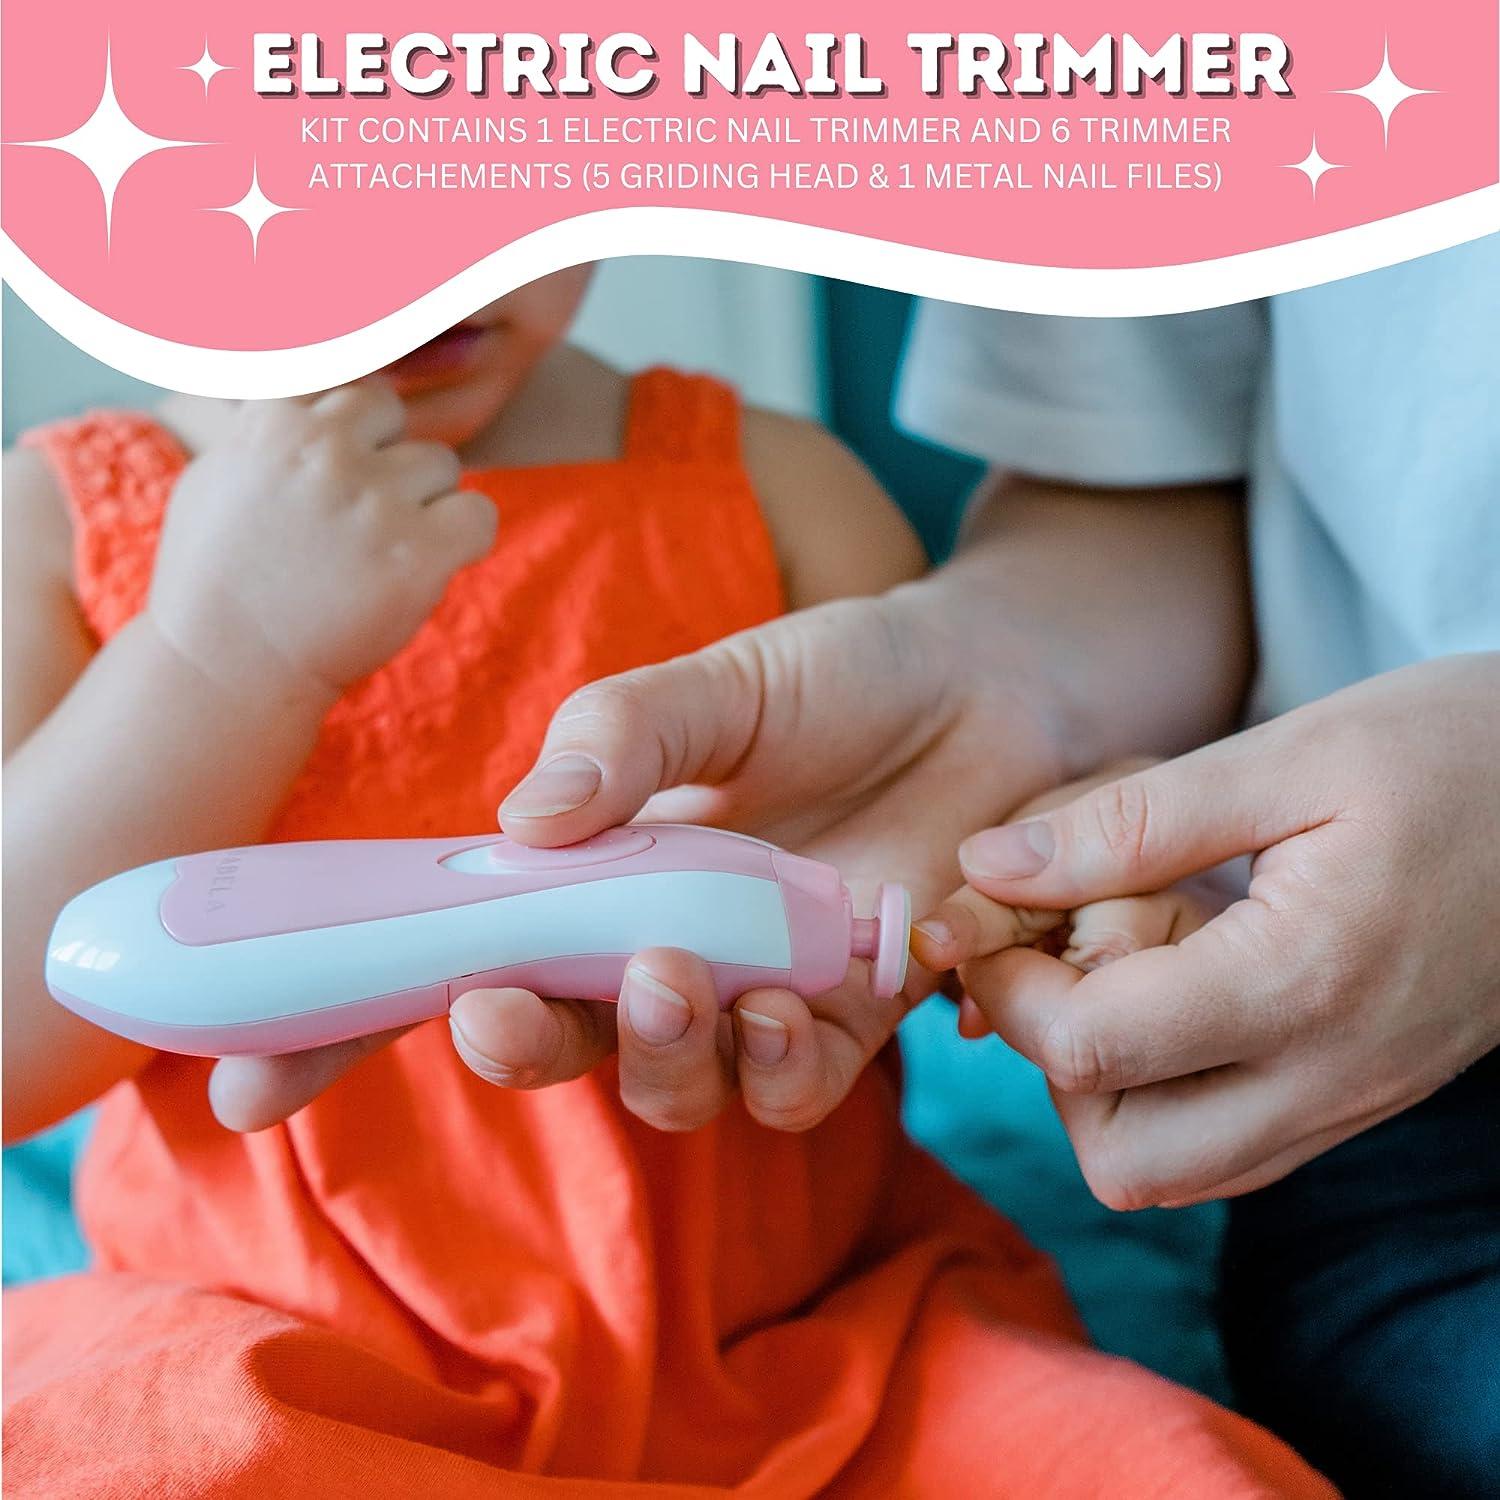 Nandkitchenwear ELECTRIC NAIL TRIMMER FOR BABY BEST QUALITY(Multicolor) -  Price in India, Buy Nandkitchenwear ELECTRIC NAIL TRIMMER FOR BABY BEST  QUALITY(Multicolor) Online In India, Reviews, Ratings & Features |  Flipkart.com